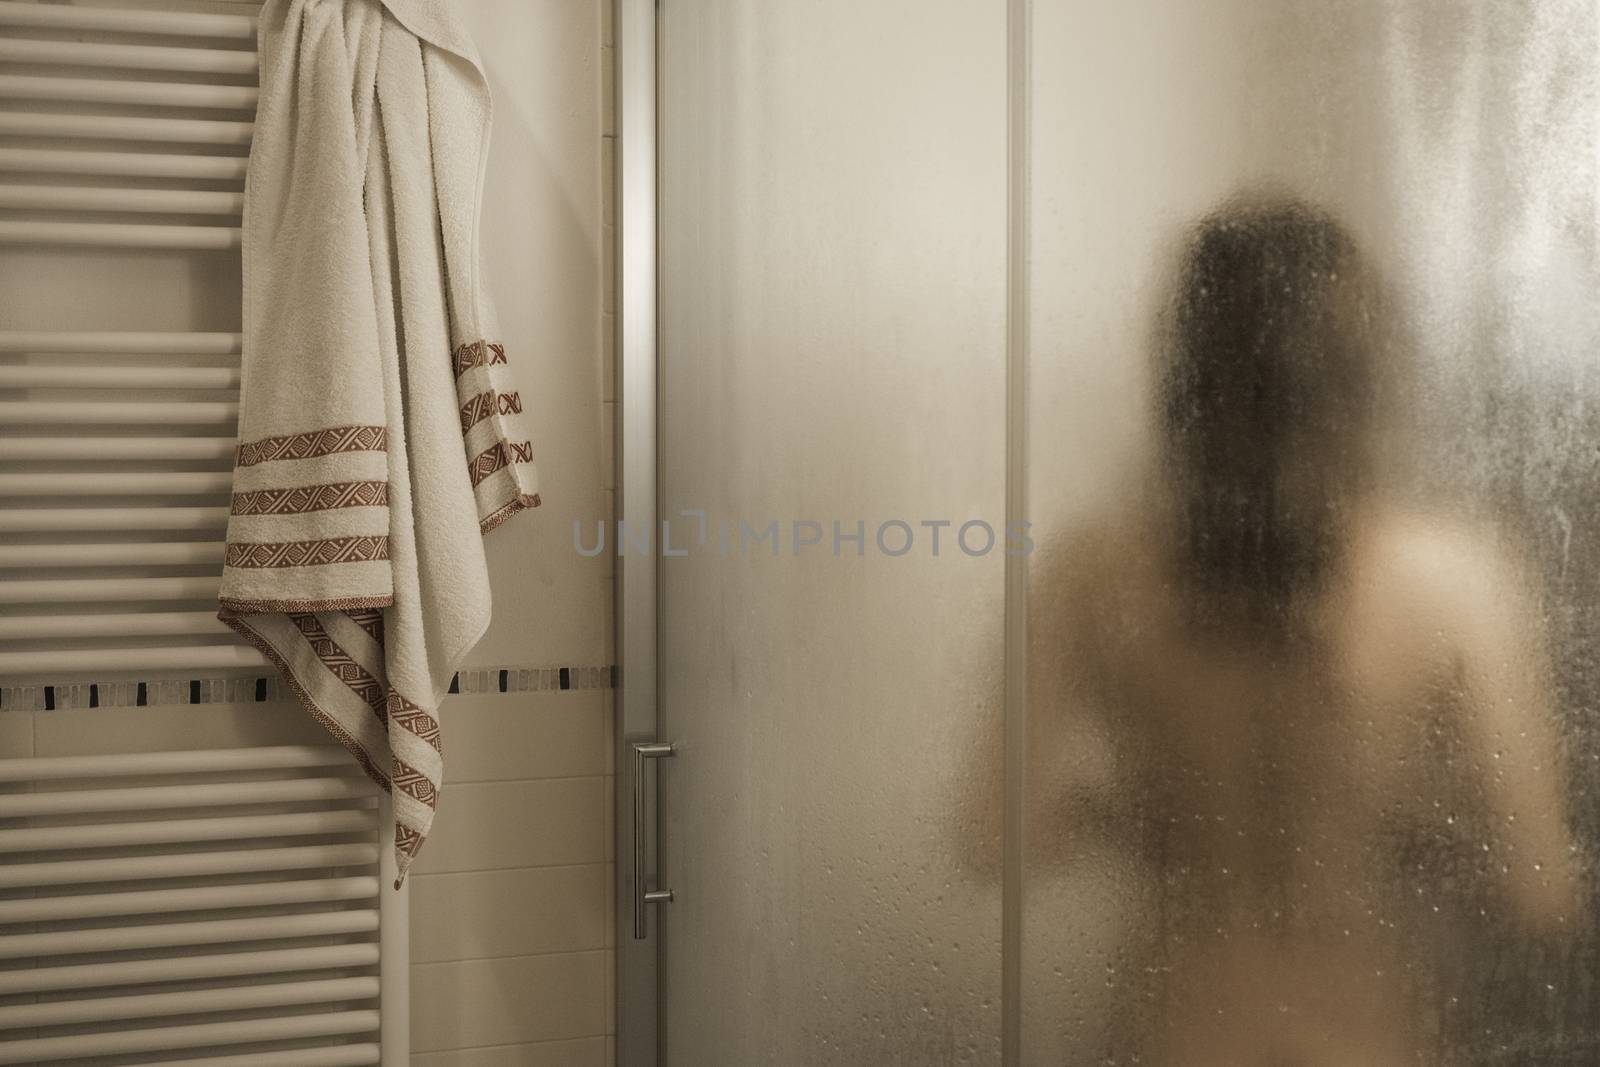 Sexy naked brunette woman take a shower inside the shower cabin seen through foggy glass in her modern design bathroom by robbyfontanesi